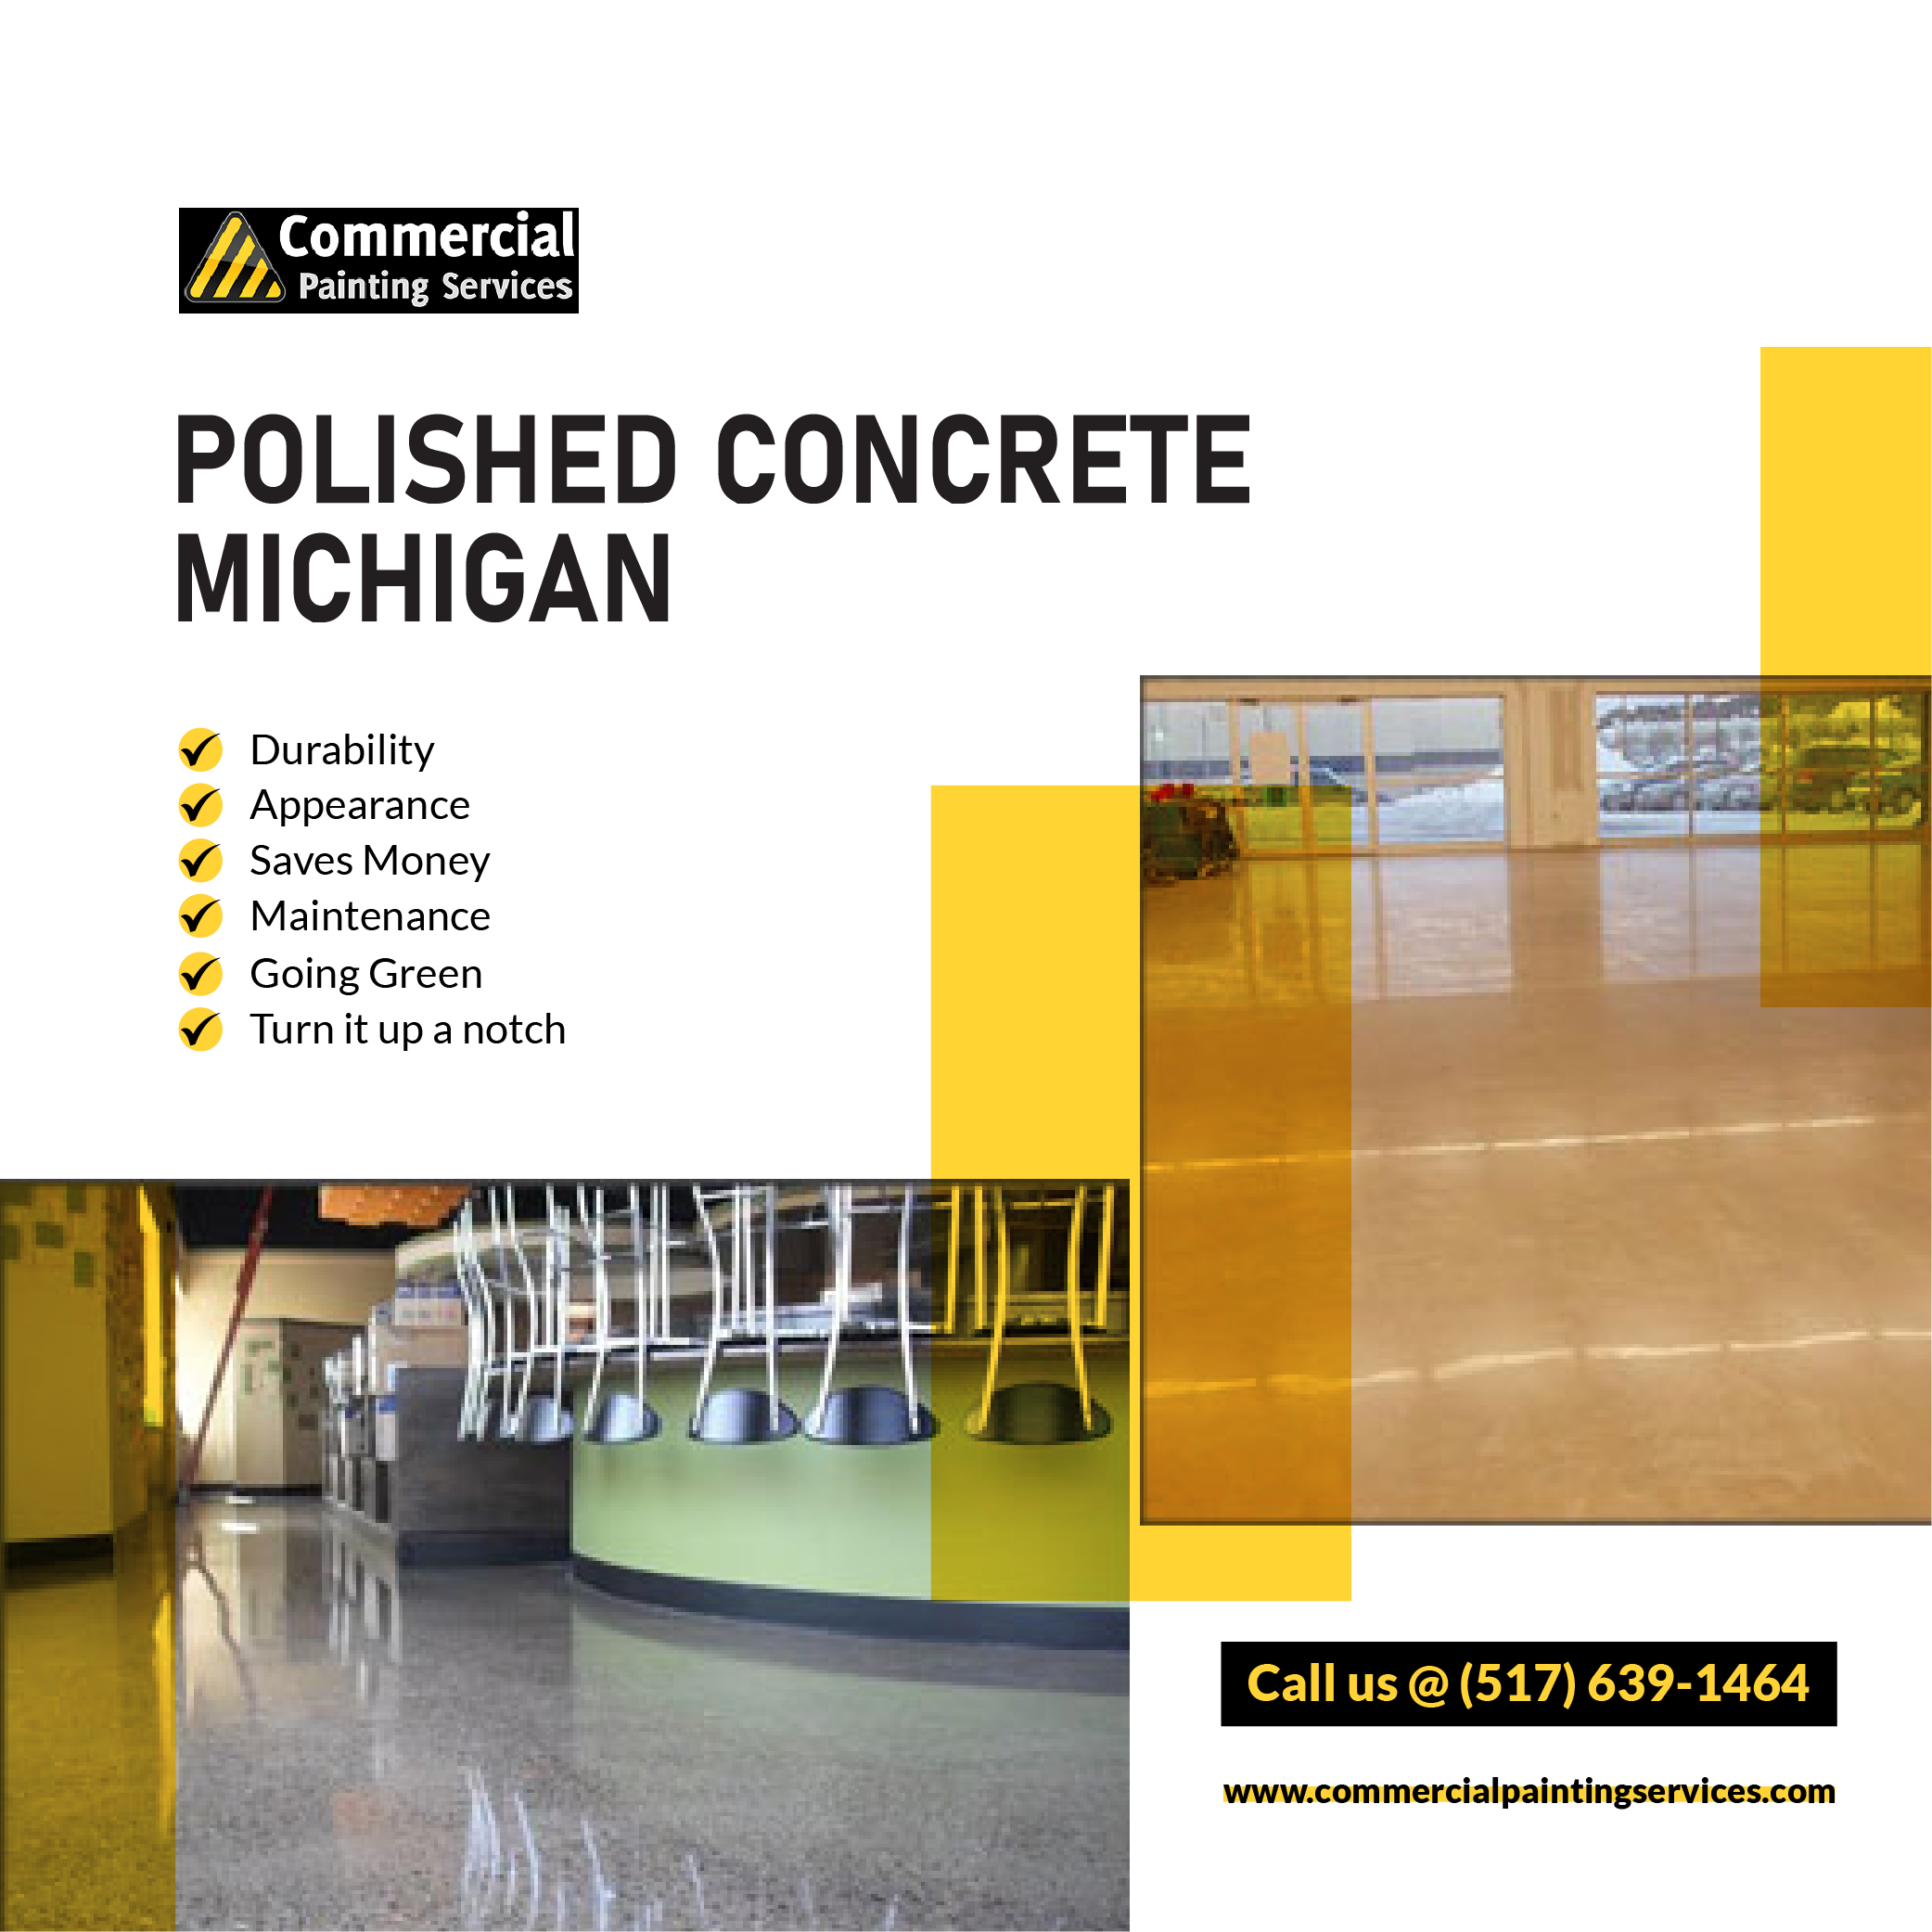 What is the process of polishing concrete and what are its benefits? – Learn New Thinks